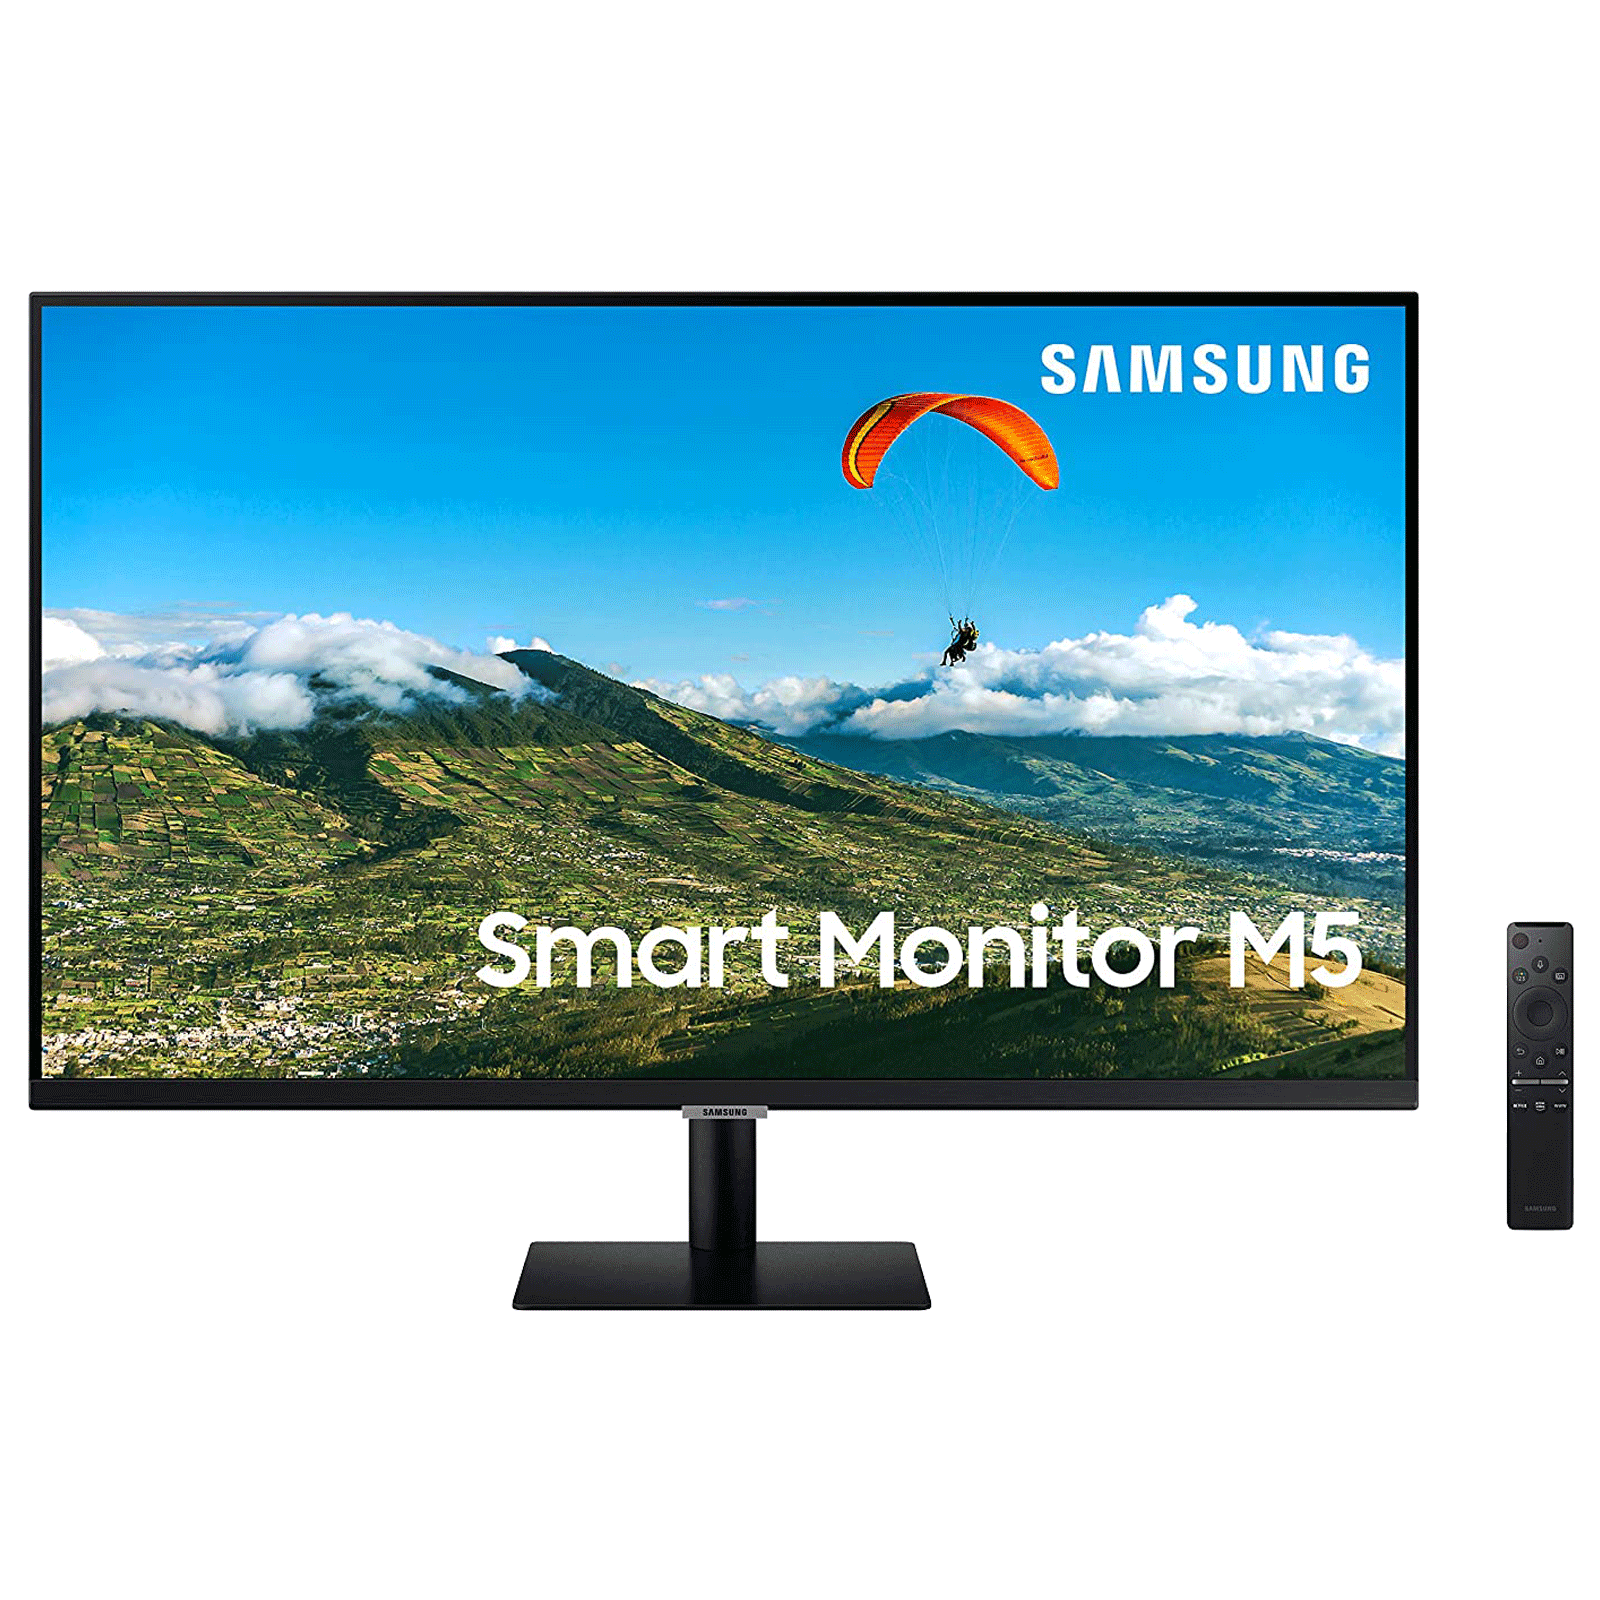 Samsung M5 68.6cm (27 Inches) Full HD LED Backlit Monitor (Adaptive Picture Technology, Screen Mirroring + DLNA, 60 Hz, LS27AM500NWXXL, Black)_1